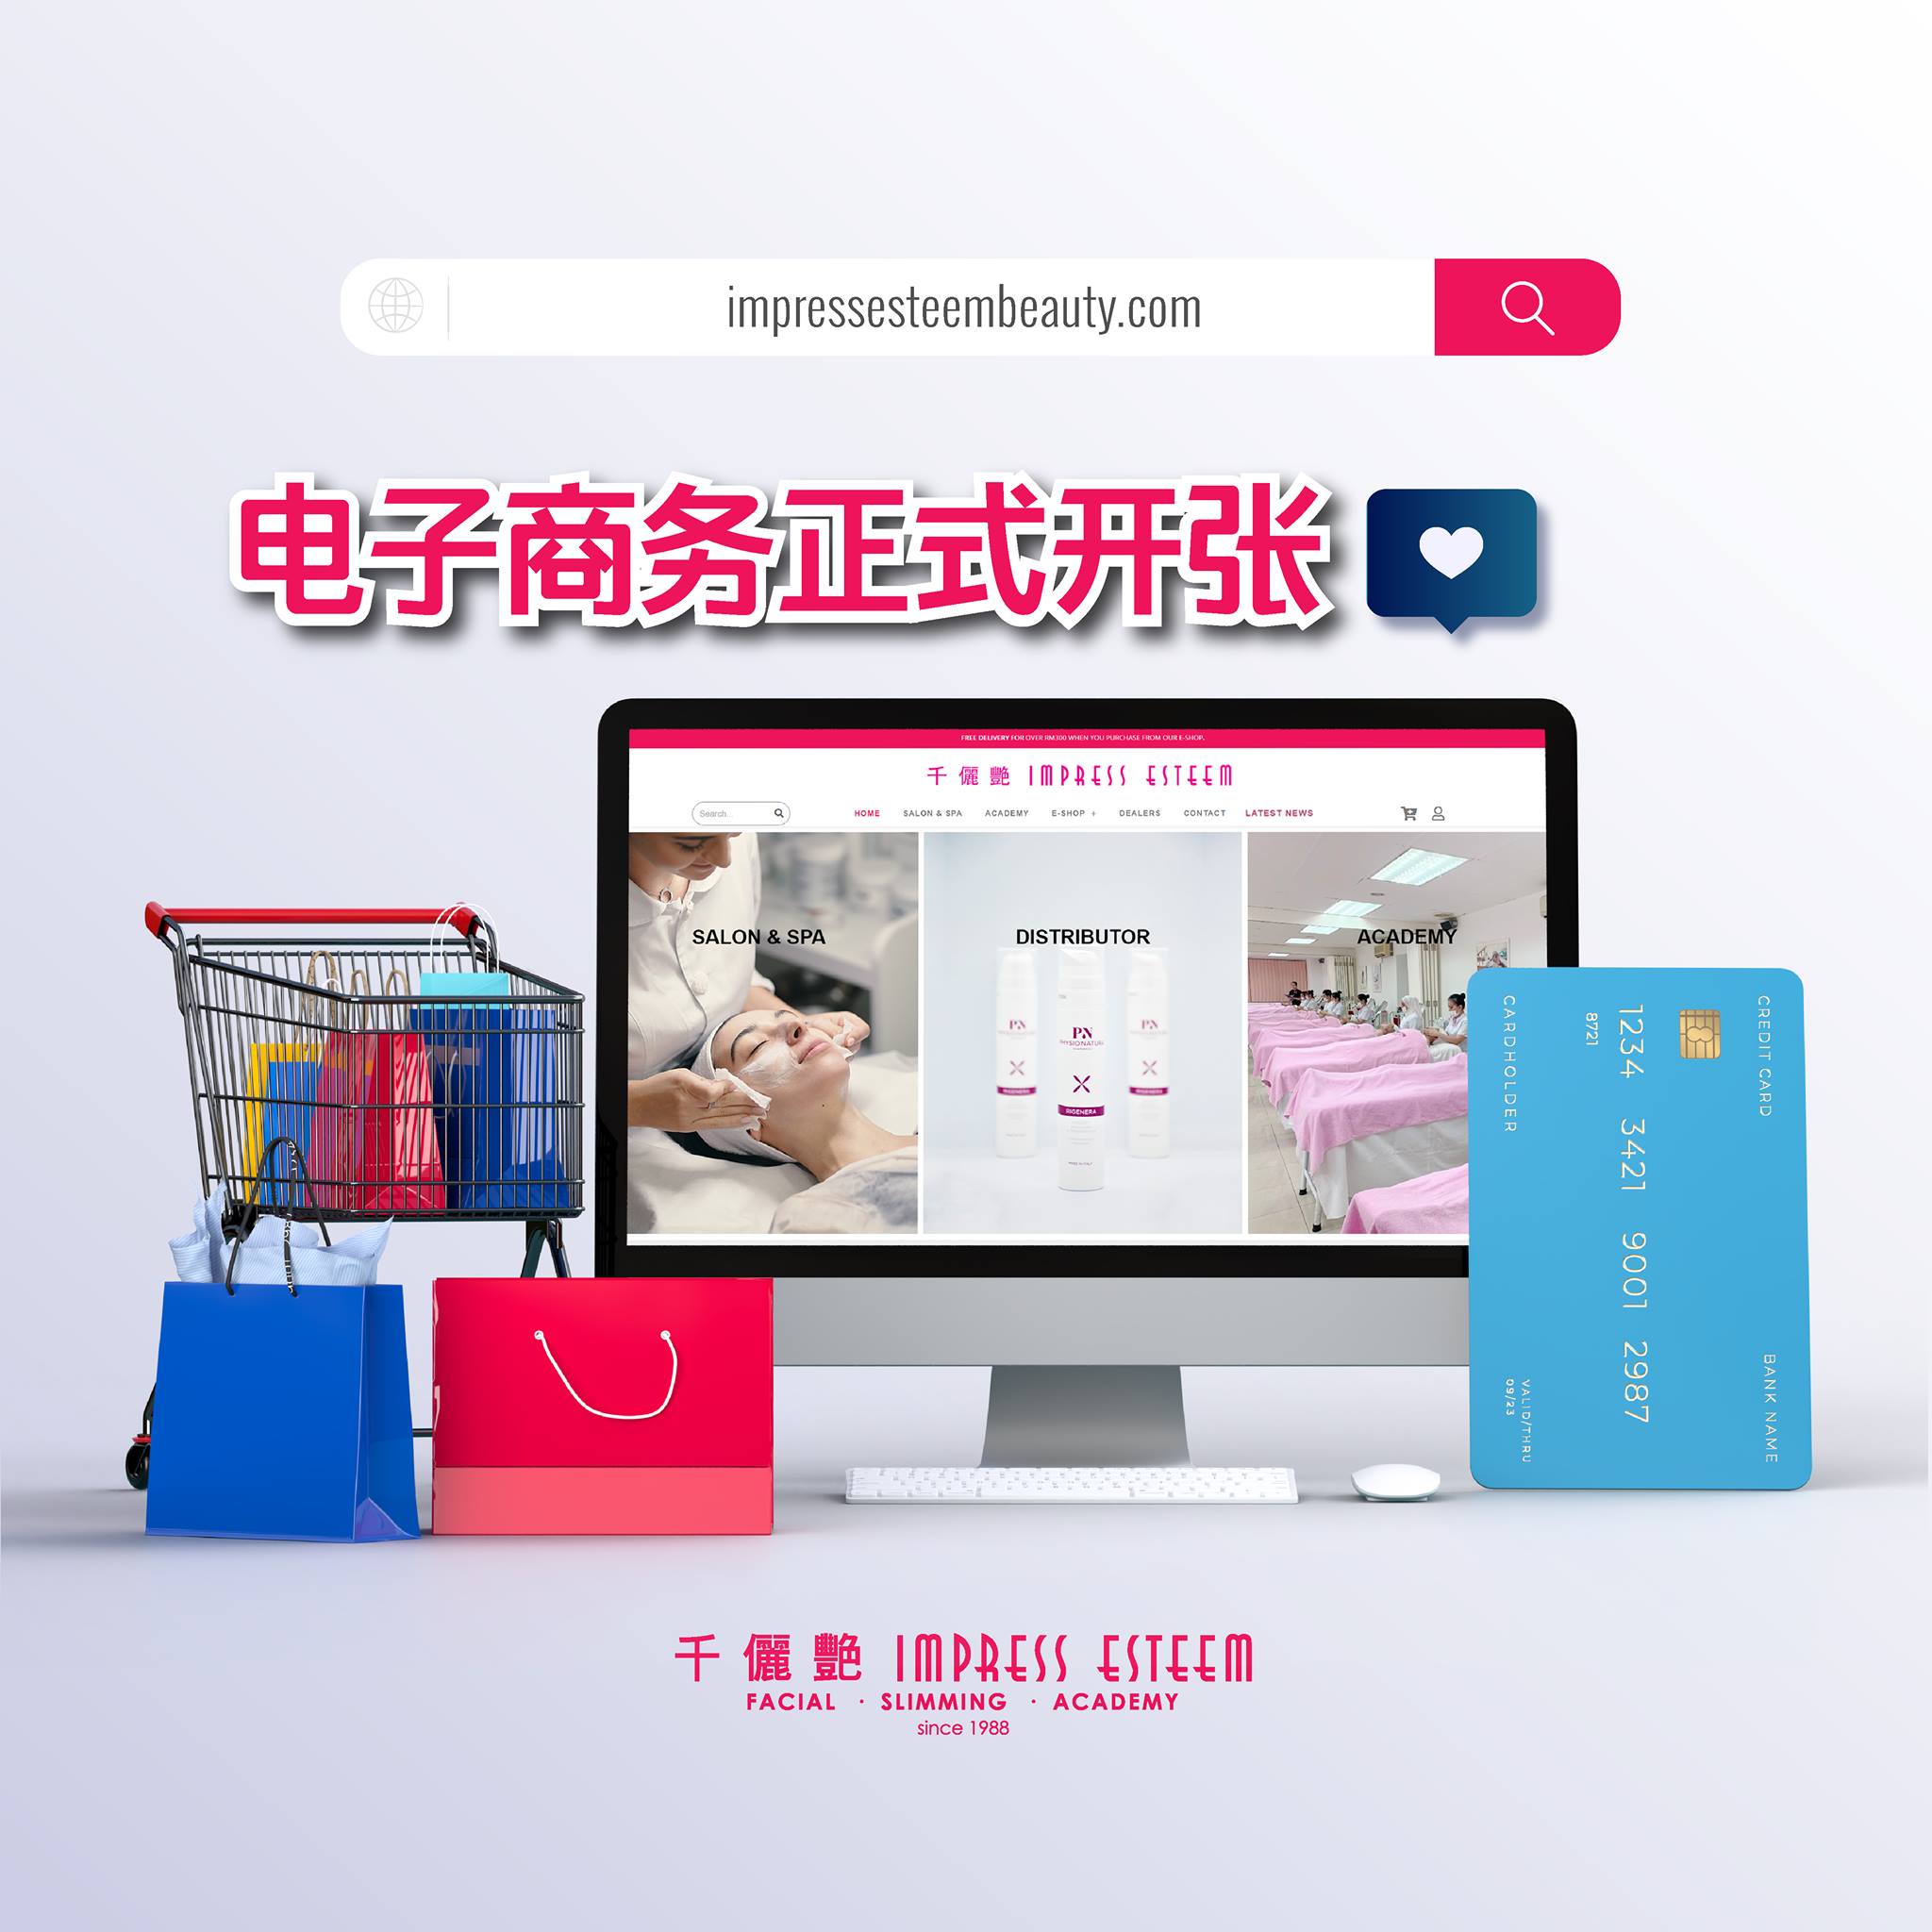 Shop at your fingertips 在家也能轻松下单